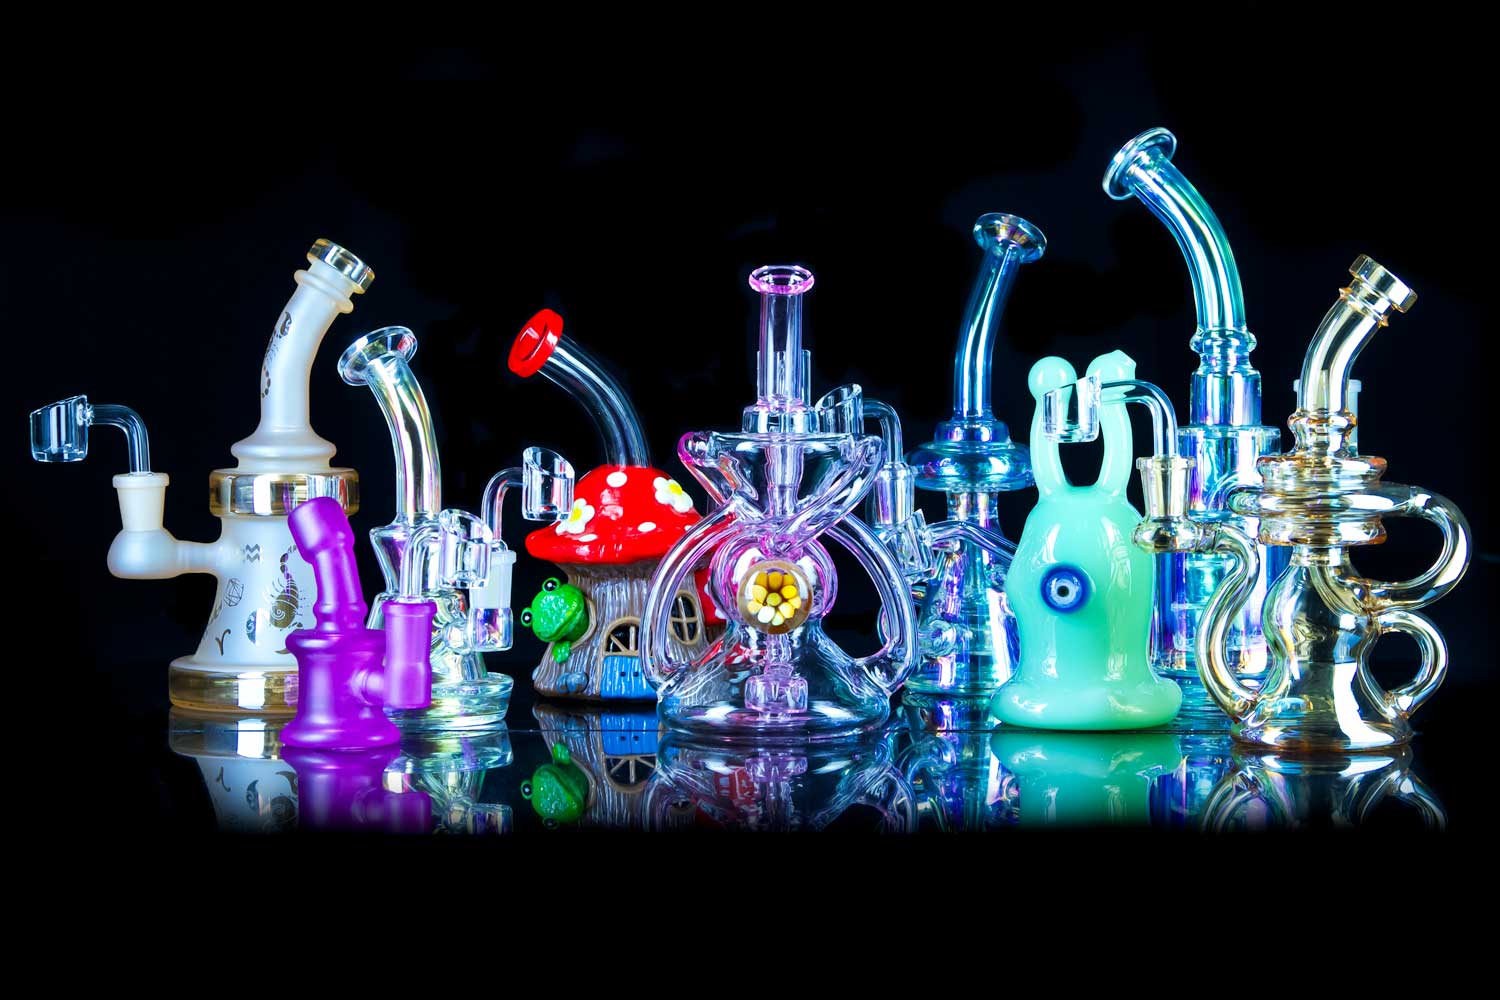 glass dab rigs for sale on black table